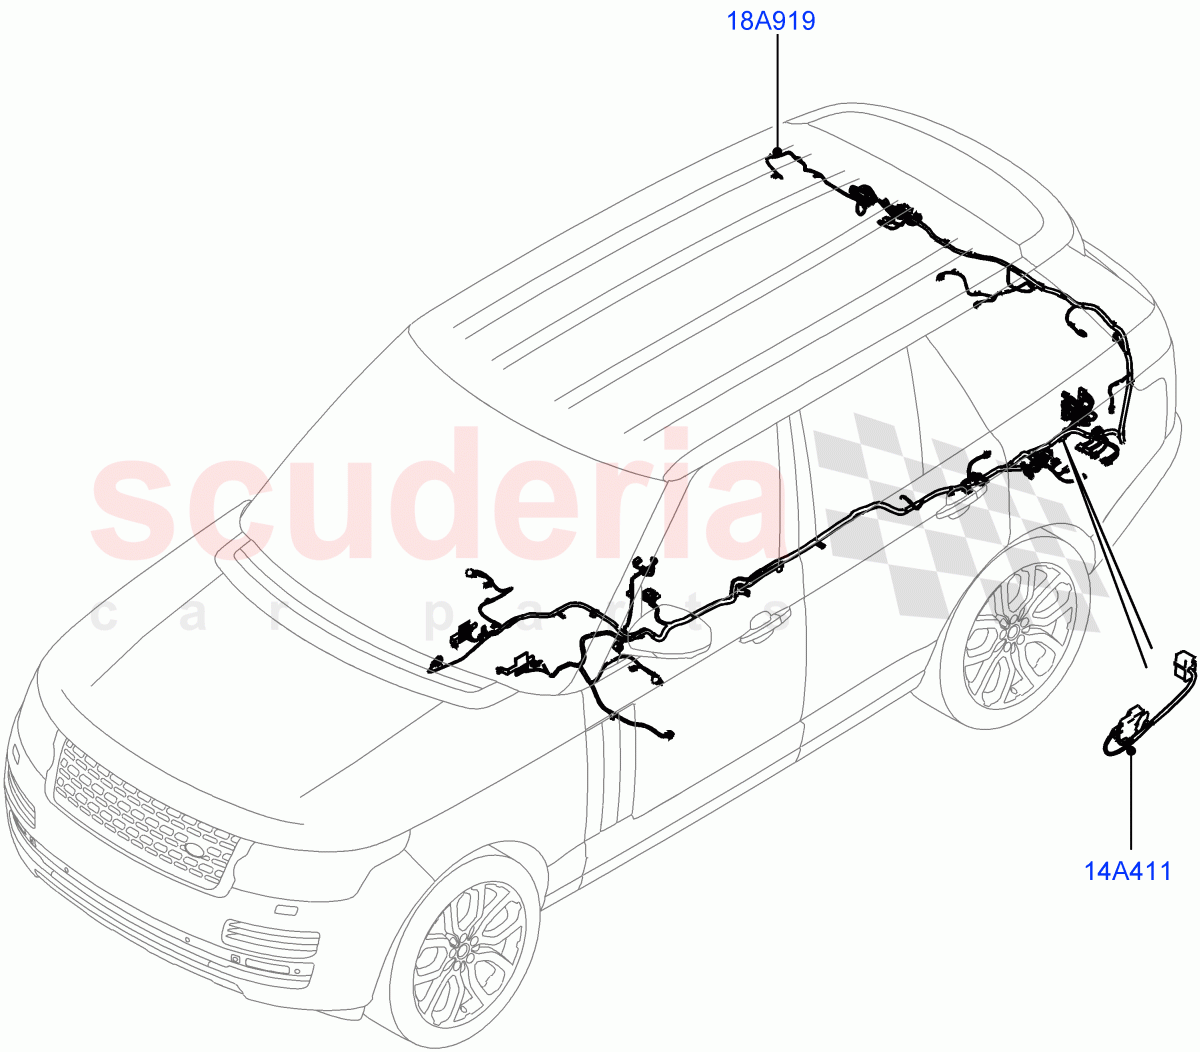 Electrical Wiring - Body And Rear(Audio/Navigation/Entertainment)((V)TOGA999999) of Land Rover Land Rover Range Rover (2012-2021) [4.4 DOHC Diesel V8 DITC]